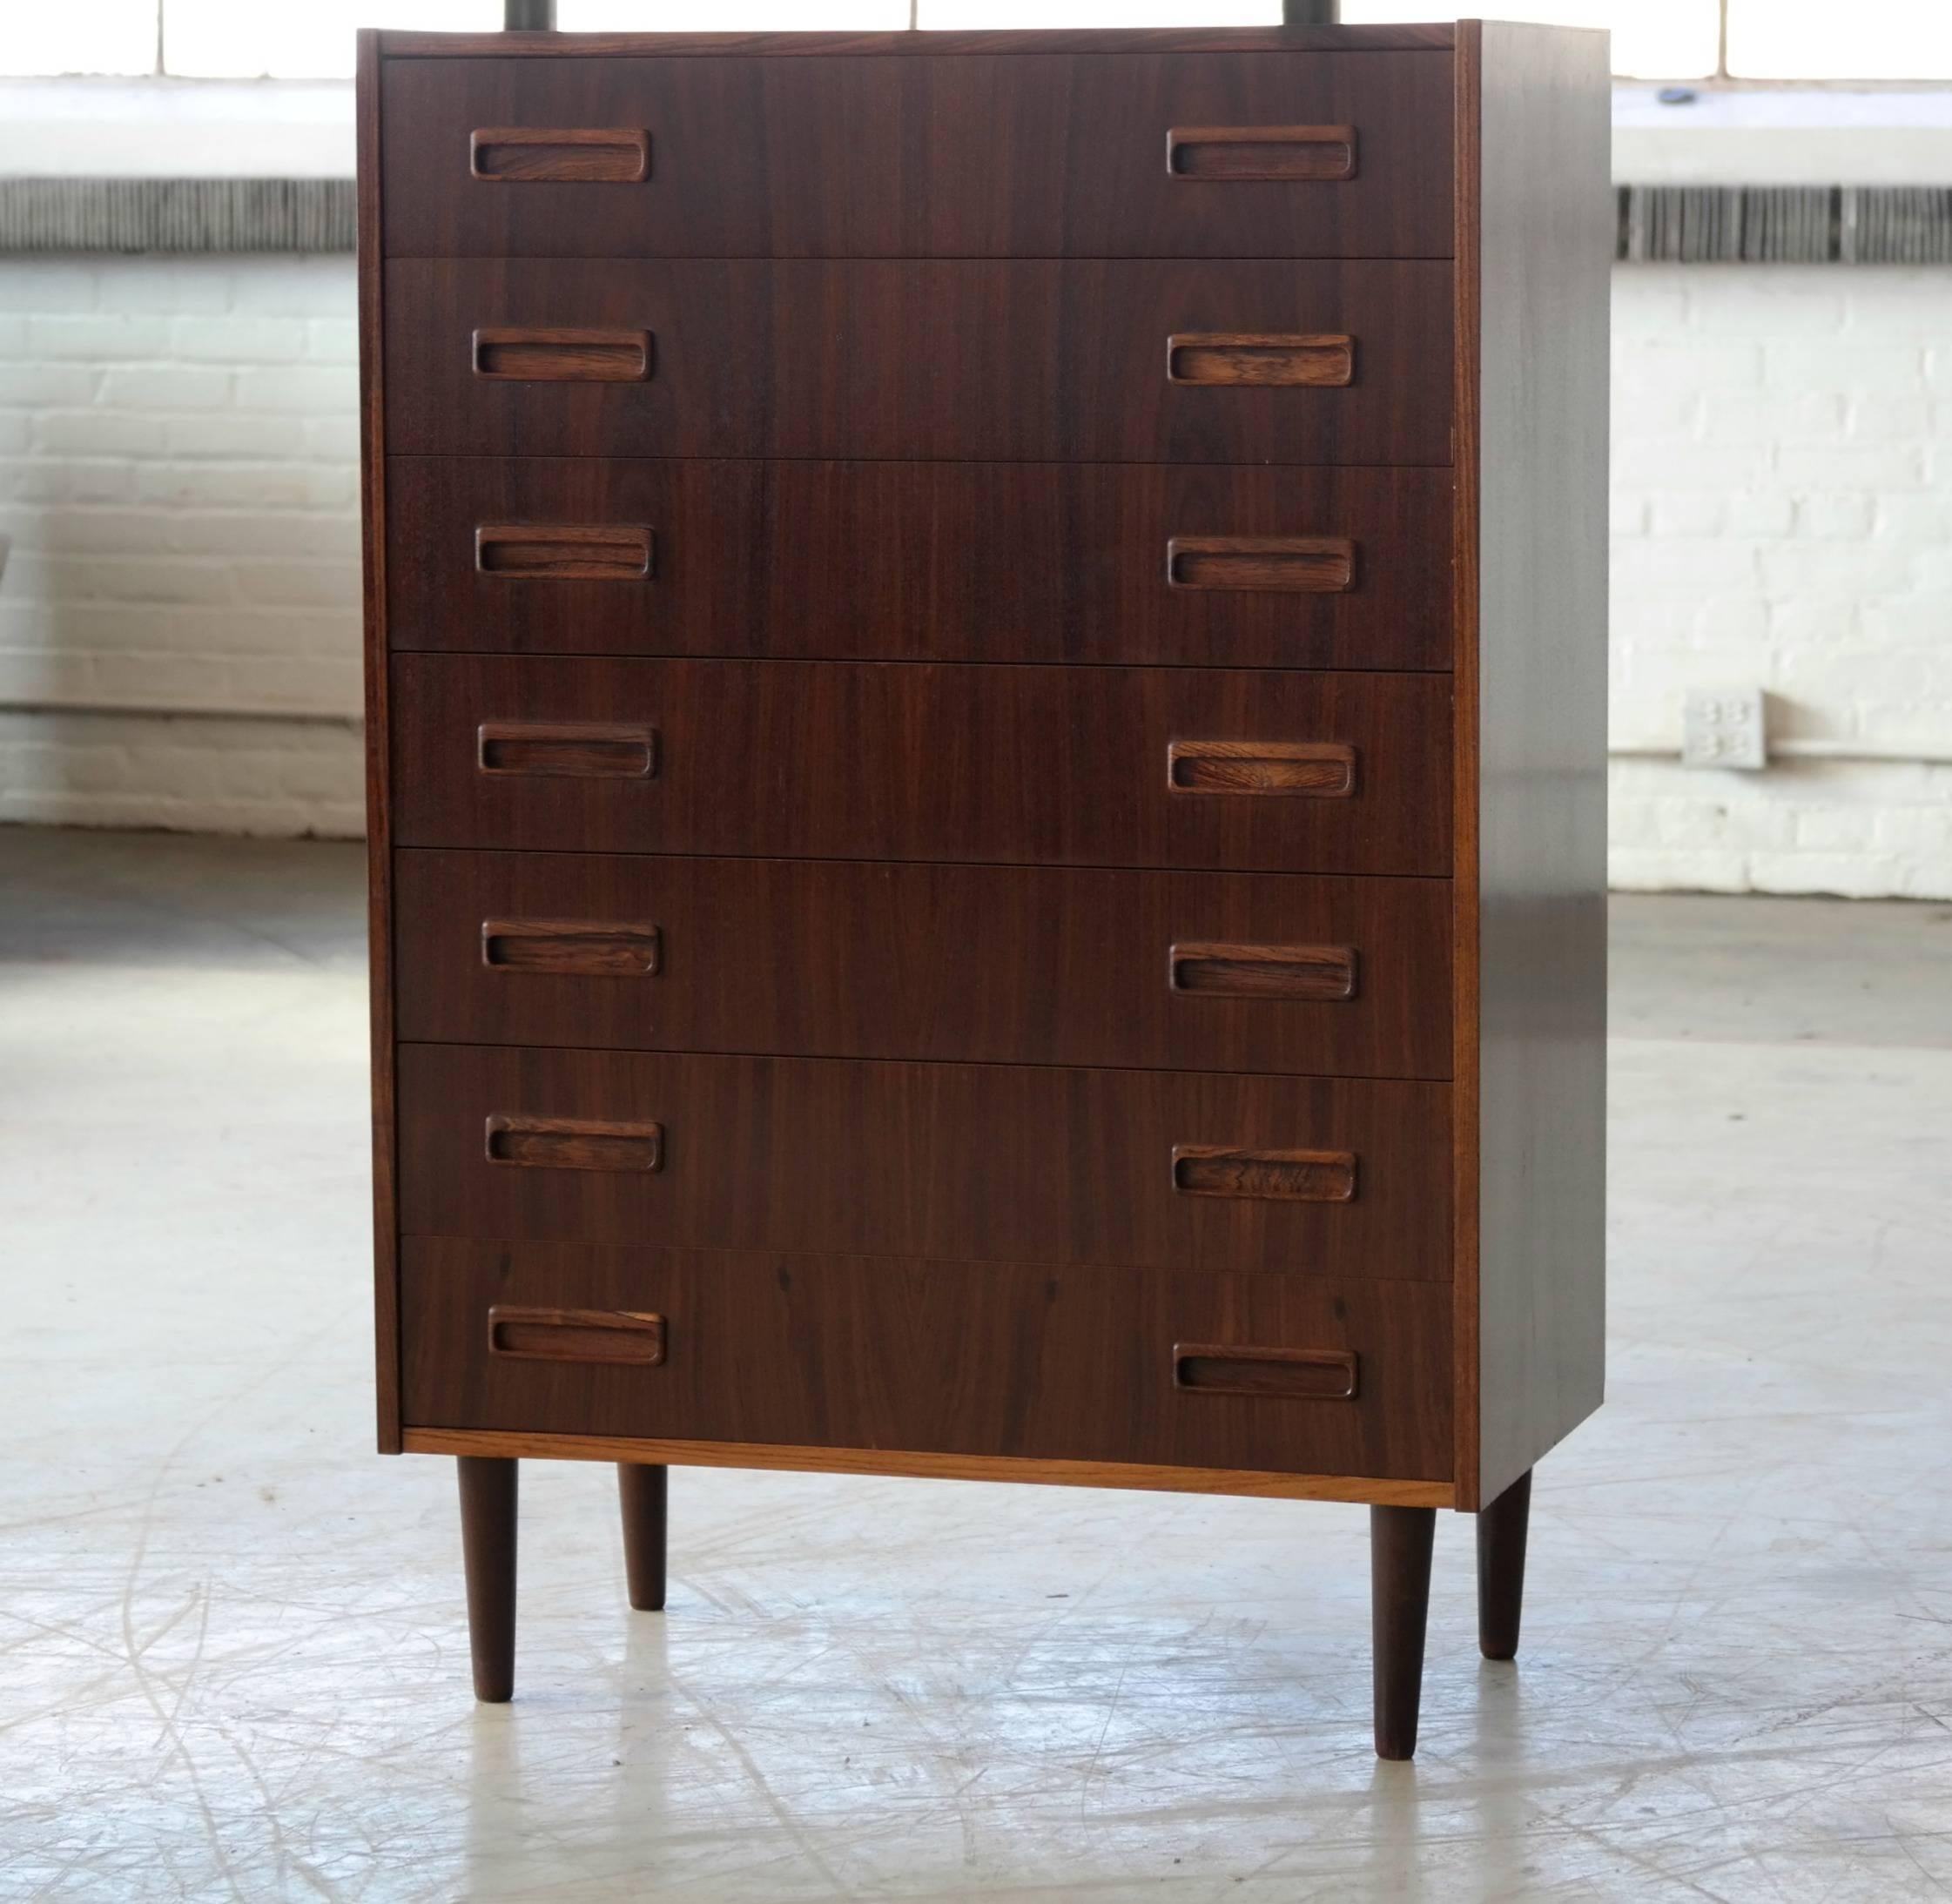 Superb tall dresser in rosewood in very good condition by P. Westergaard Mobler of Denmark, circa 1960 with minimal age wear. Nice carved pulls and solid edges. Dovetailed drawers in solid ply.